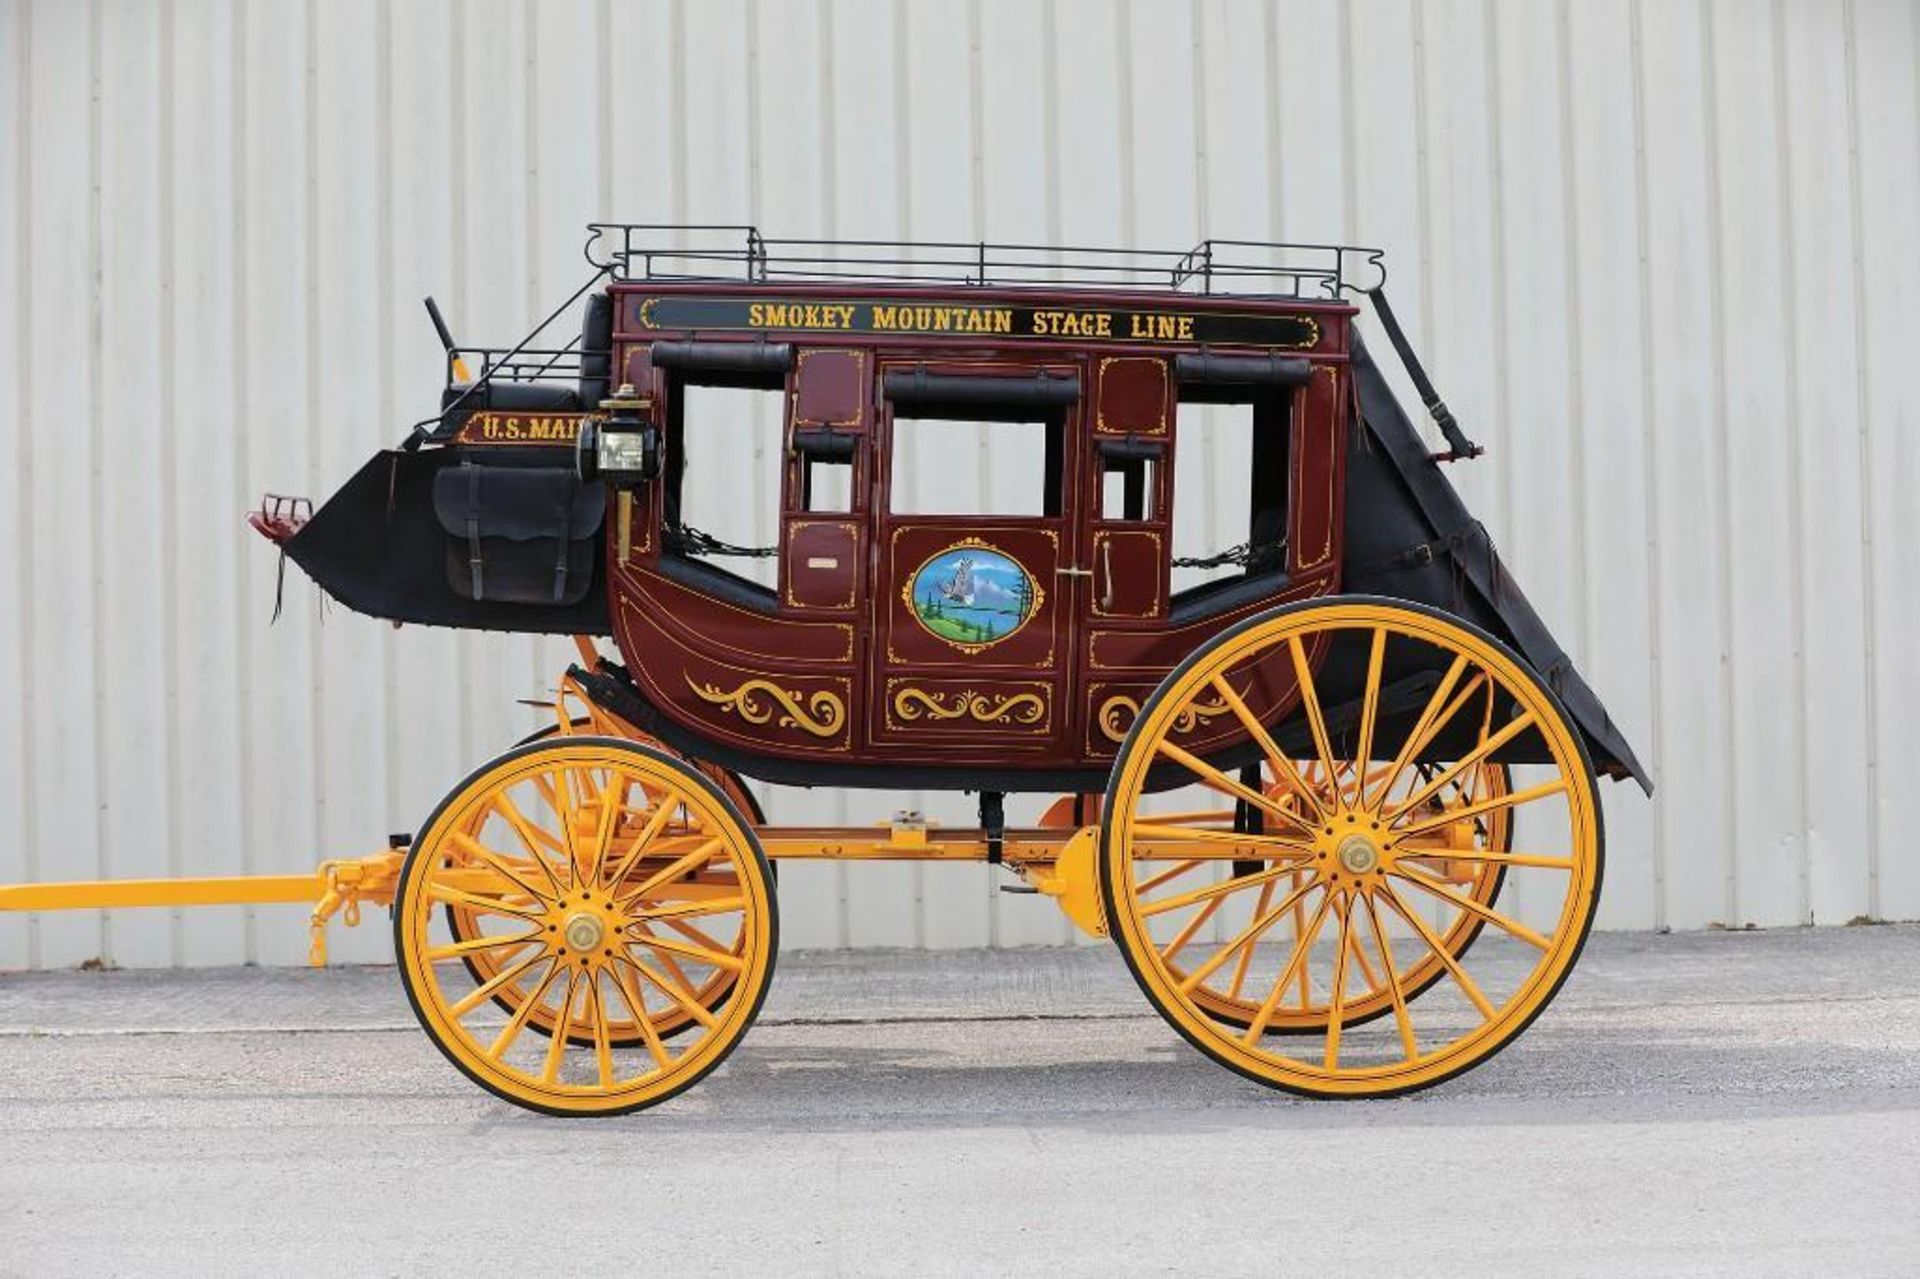 LATHAM Stagecoach, Built in Fortuna, Missouri in 2001, Mint Condition, Hooked Twice for Parades